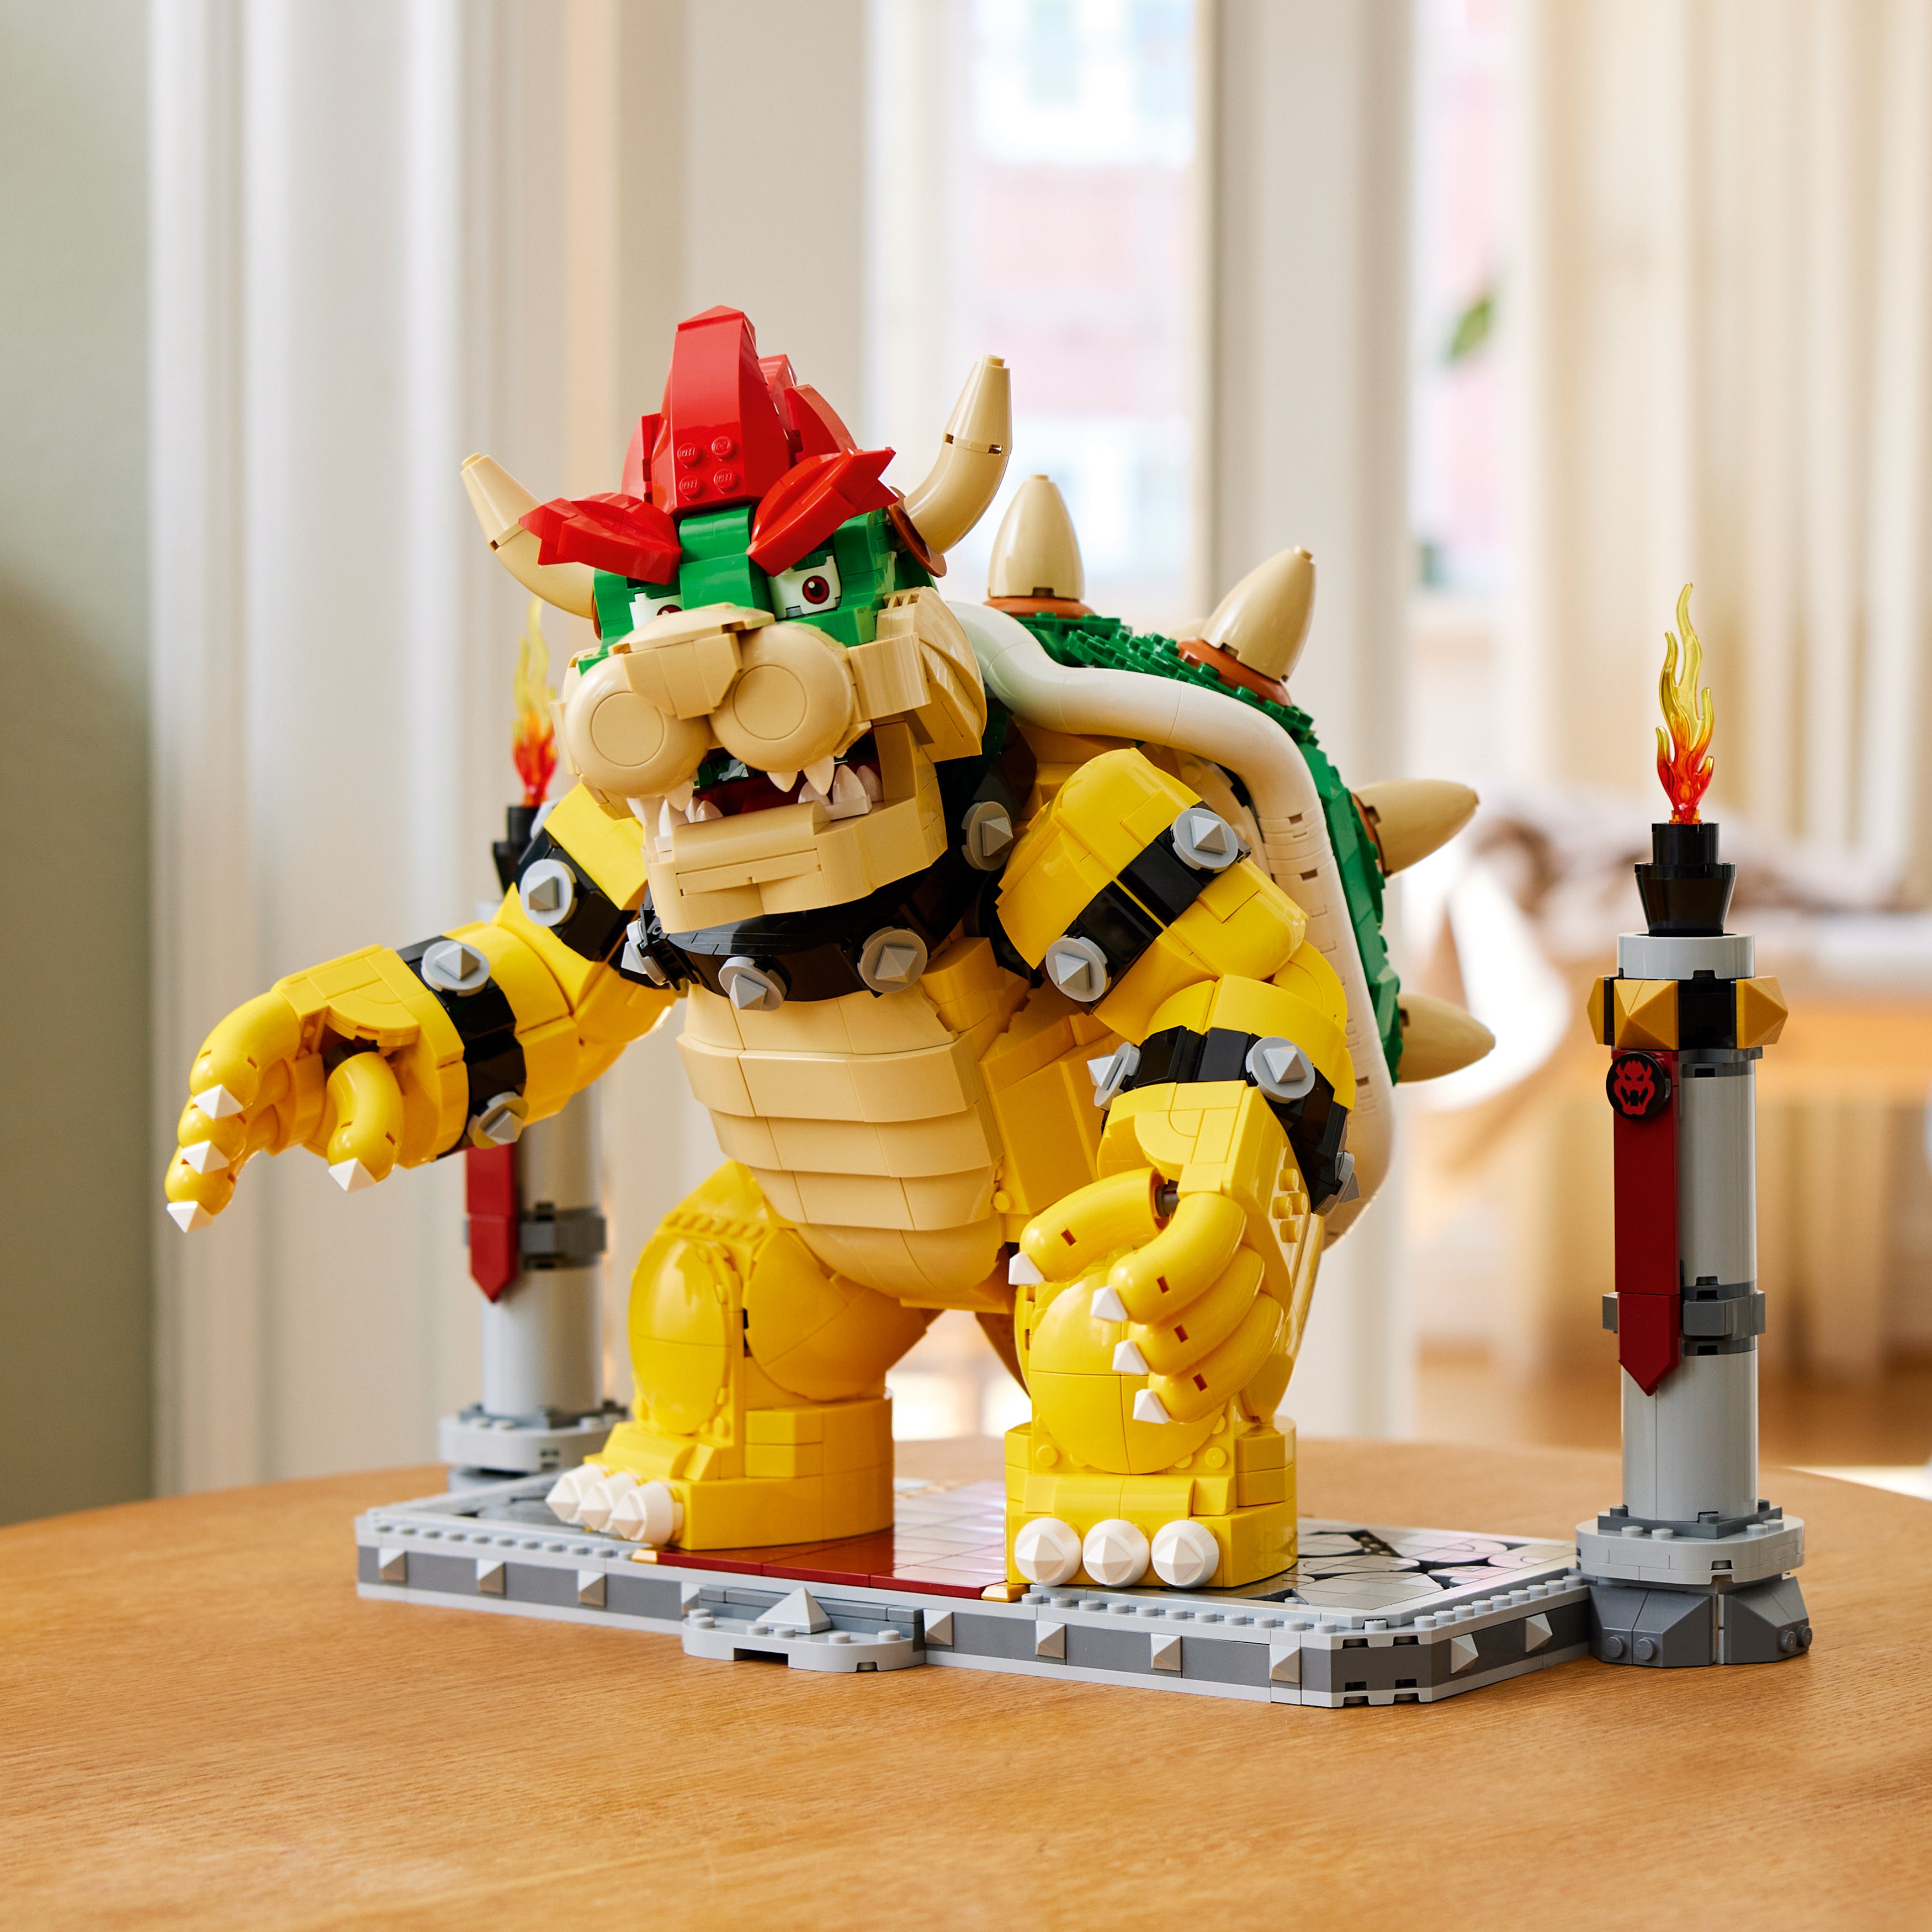 Lego 71411 The Mighty Bowser™